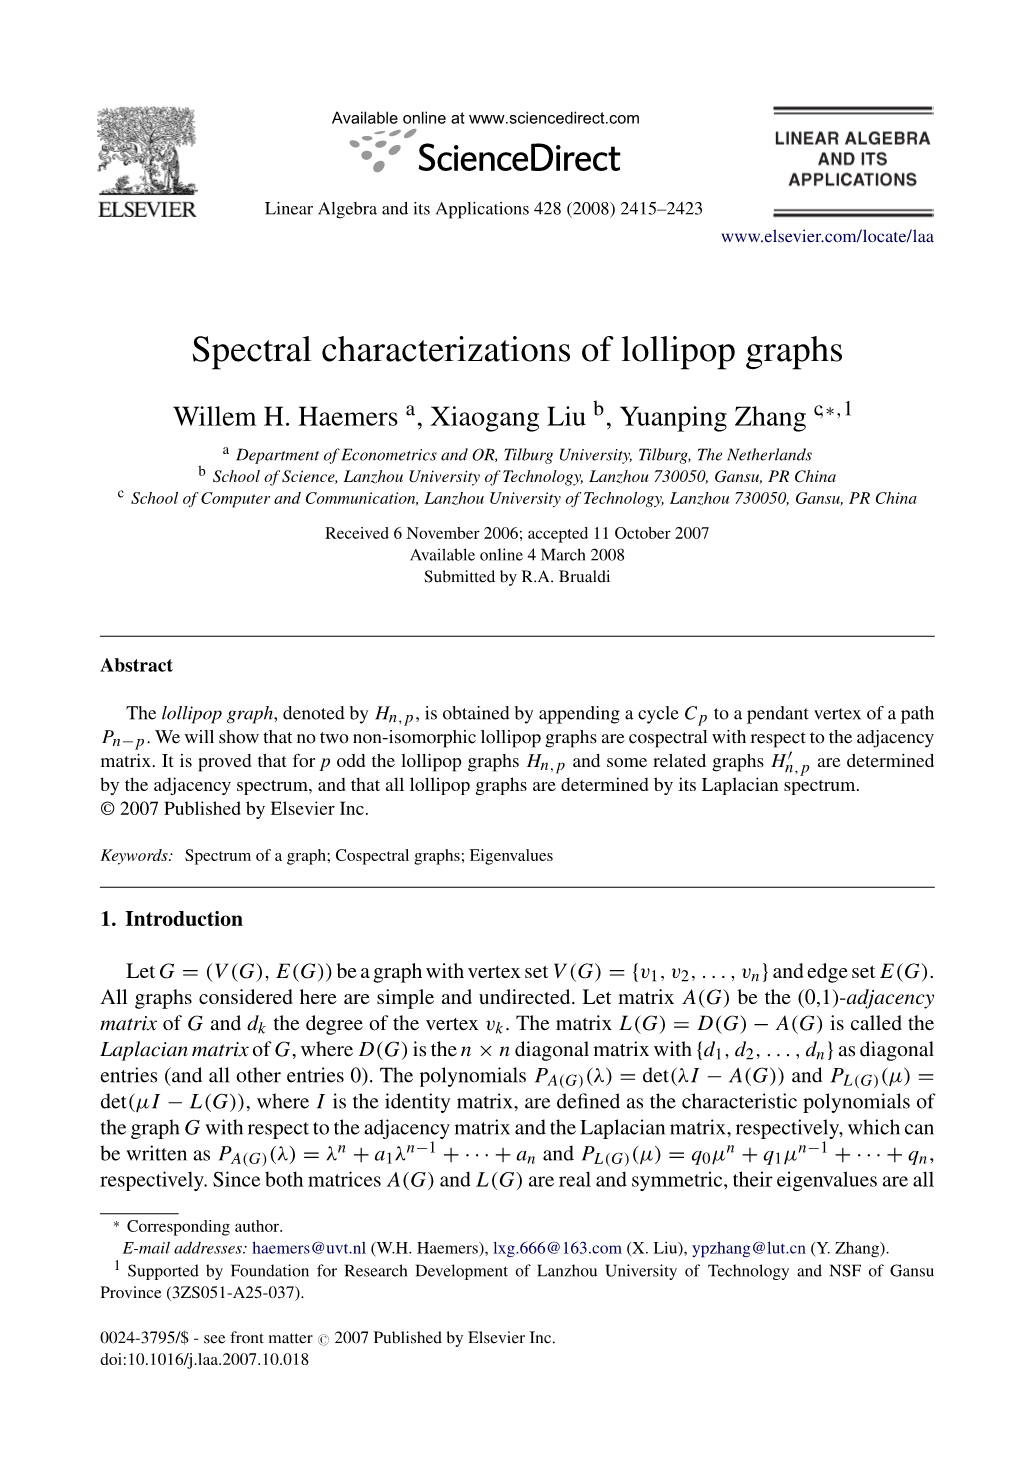 Spectral Characterizations of Lollipop Graphs